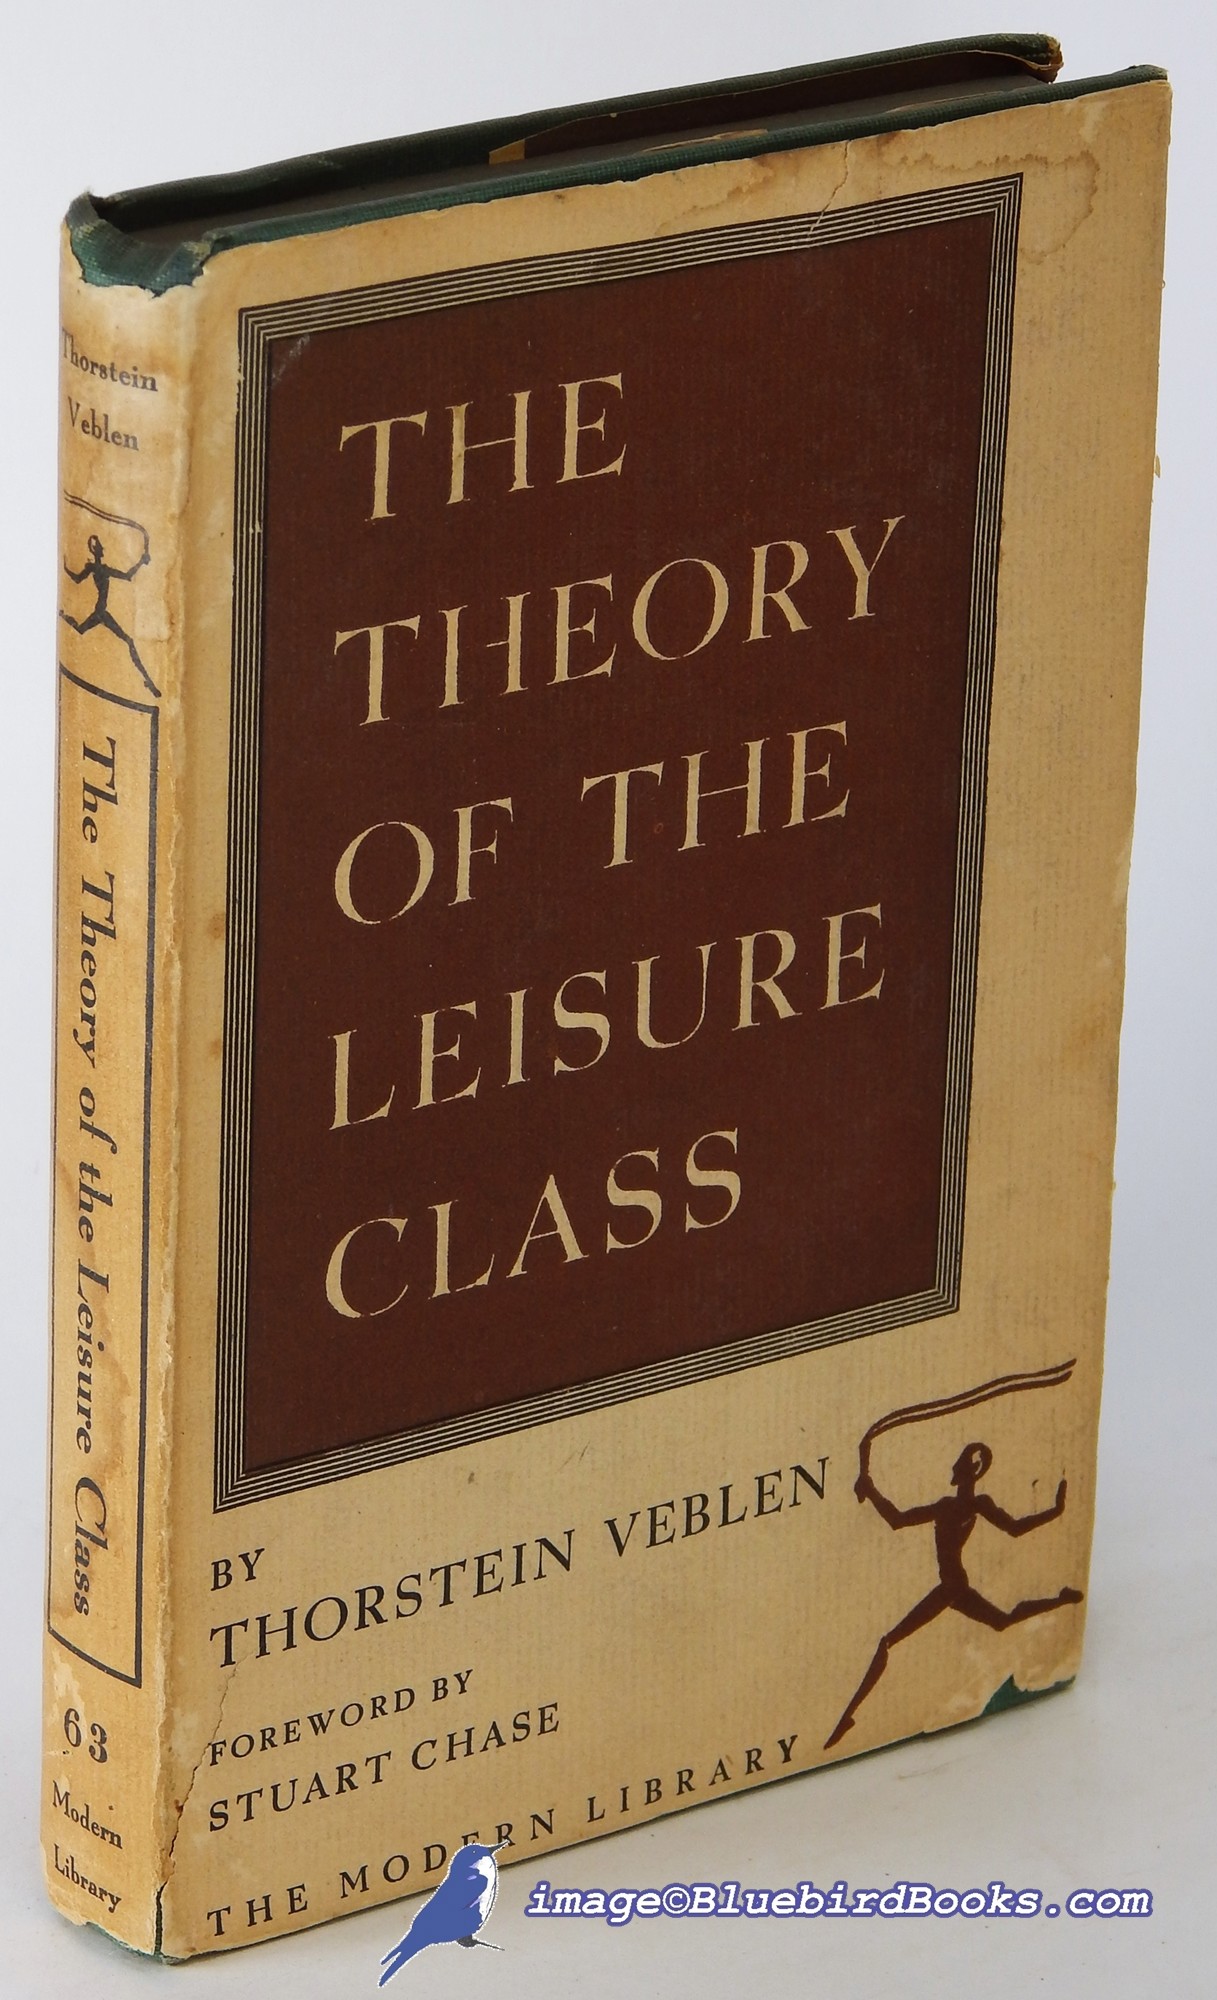 VEBLEN, THORSTEIN - The Theory of the Leisure Class: An Economic Study of Institutions (Modern Library #63. 2)